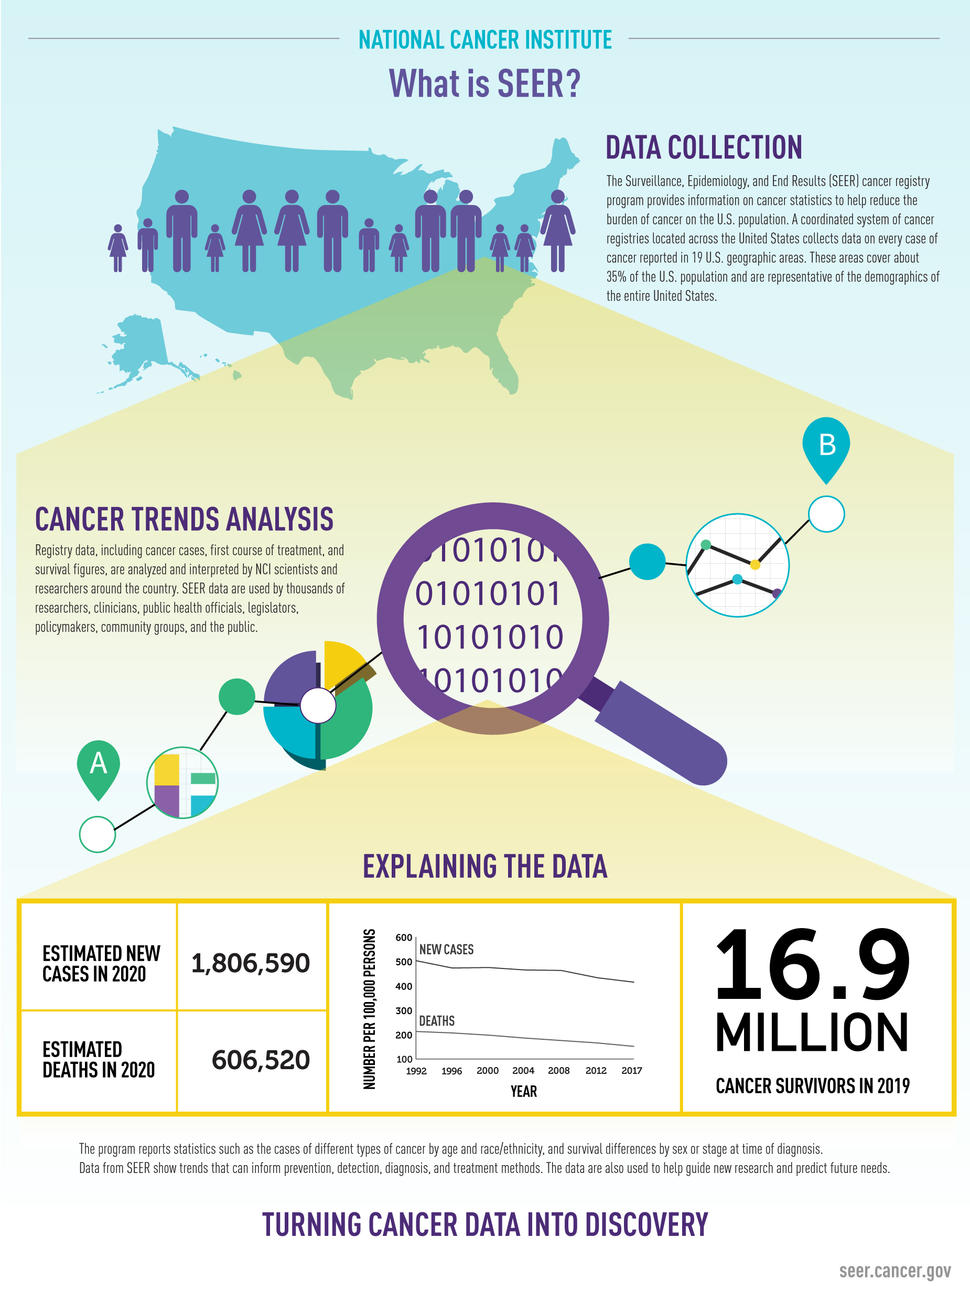 What Is SEER? NCI’s Surveillance, Epidemiology, and End Results (SEER) program collects population-based cancer statistics. Scientists, researchers, policymakers, and many others use SEER data to analyze and interpret trends in cancer rates. The data can help guide new research discoveries and predict future needs.